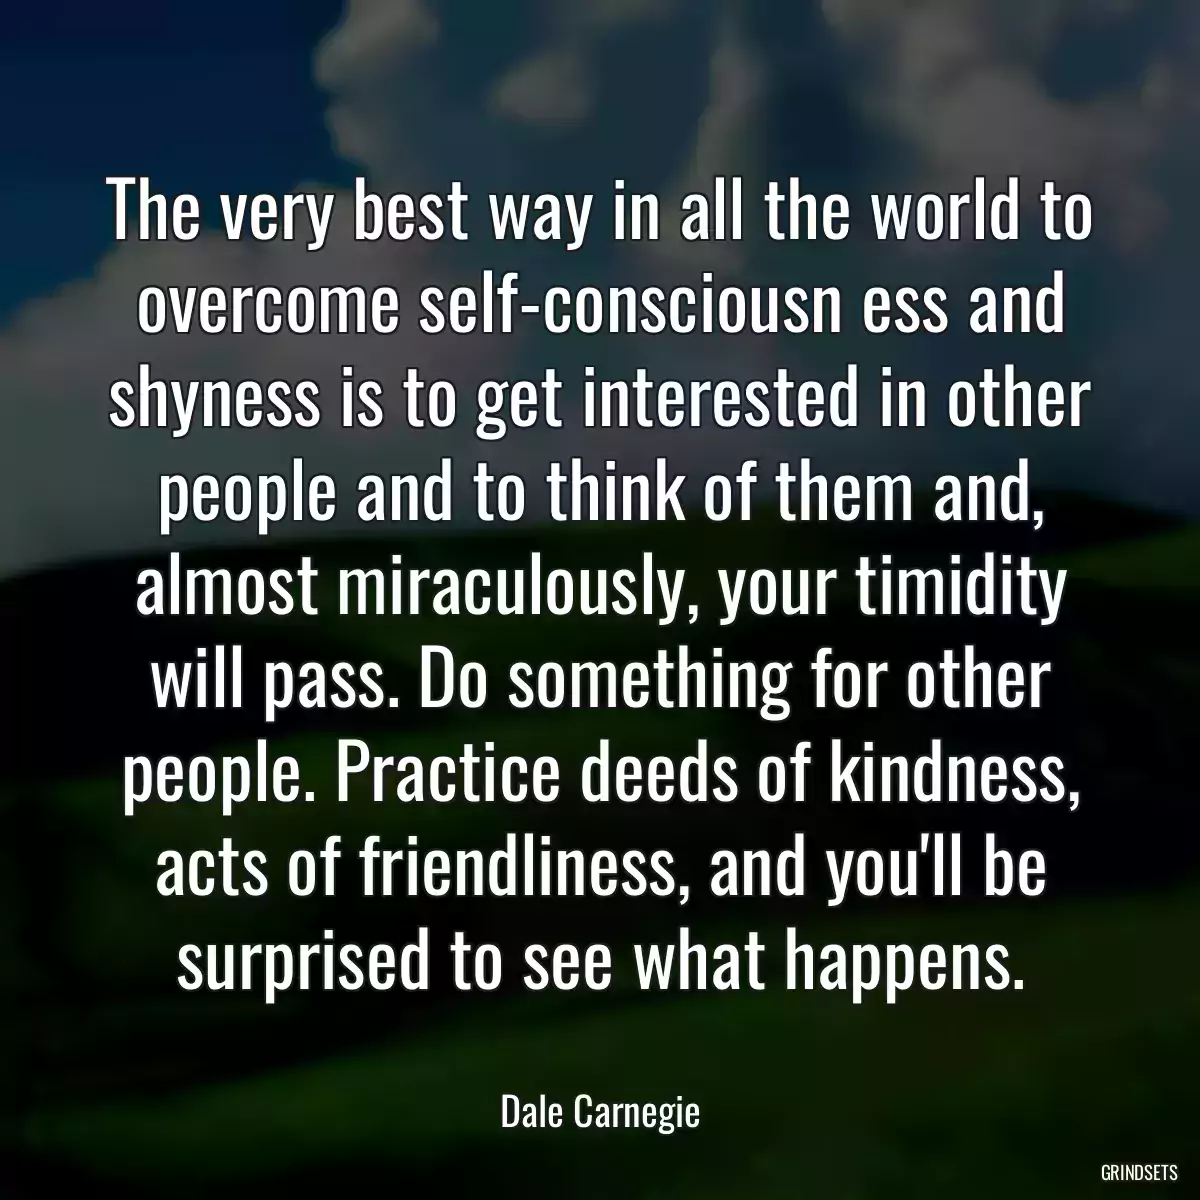 The very best way in all the world to overcome self-consciousn ess and shyness is to get interested in other people and to think of them and, almost miraculously, your timidity will pass. Do something for other people. Practice deeds of kindness, acts of friendliness, and you\'ll be surprised to see what happens.